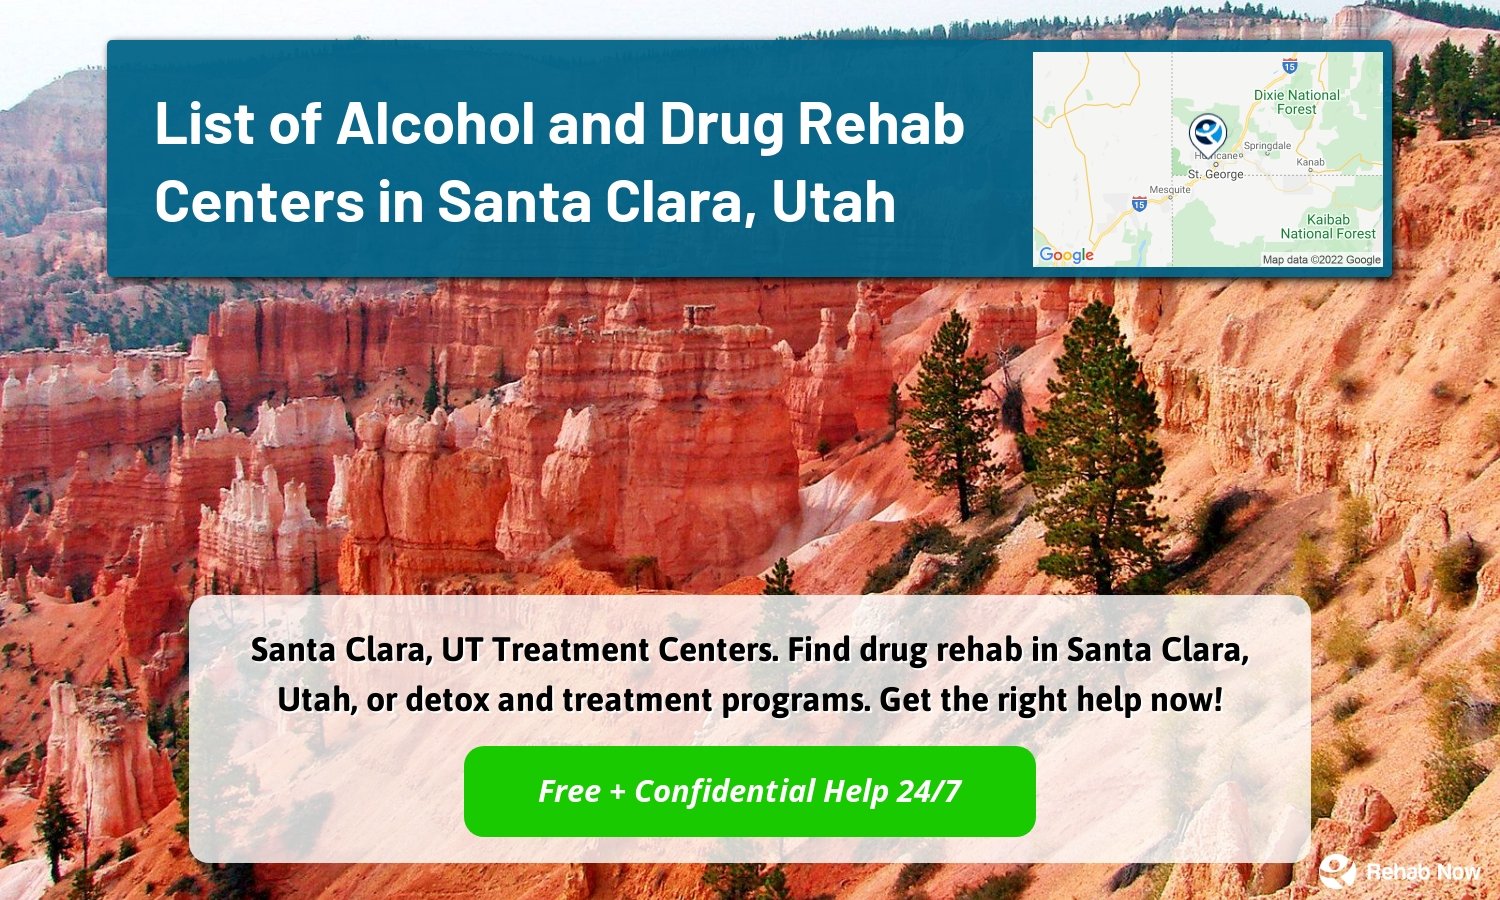 Santa Clara, UT Treatment Centers. Find drug rehab in Santa Clara, Utah, or detox and treatment programs. Get the right help now!